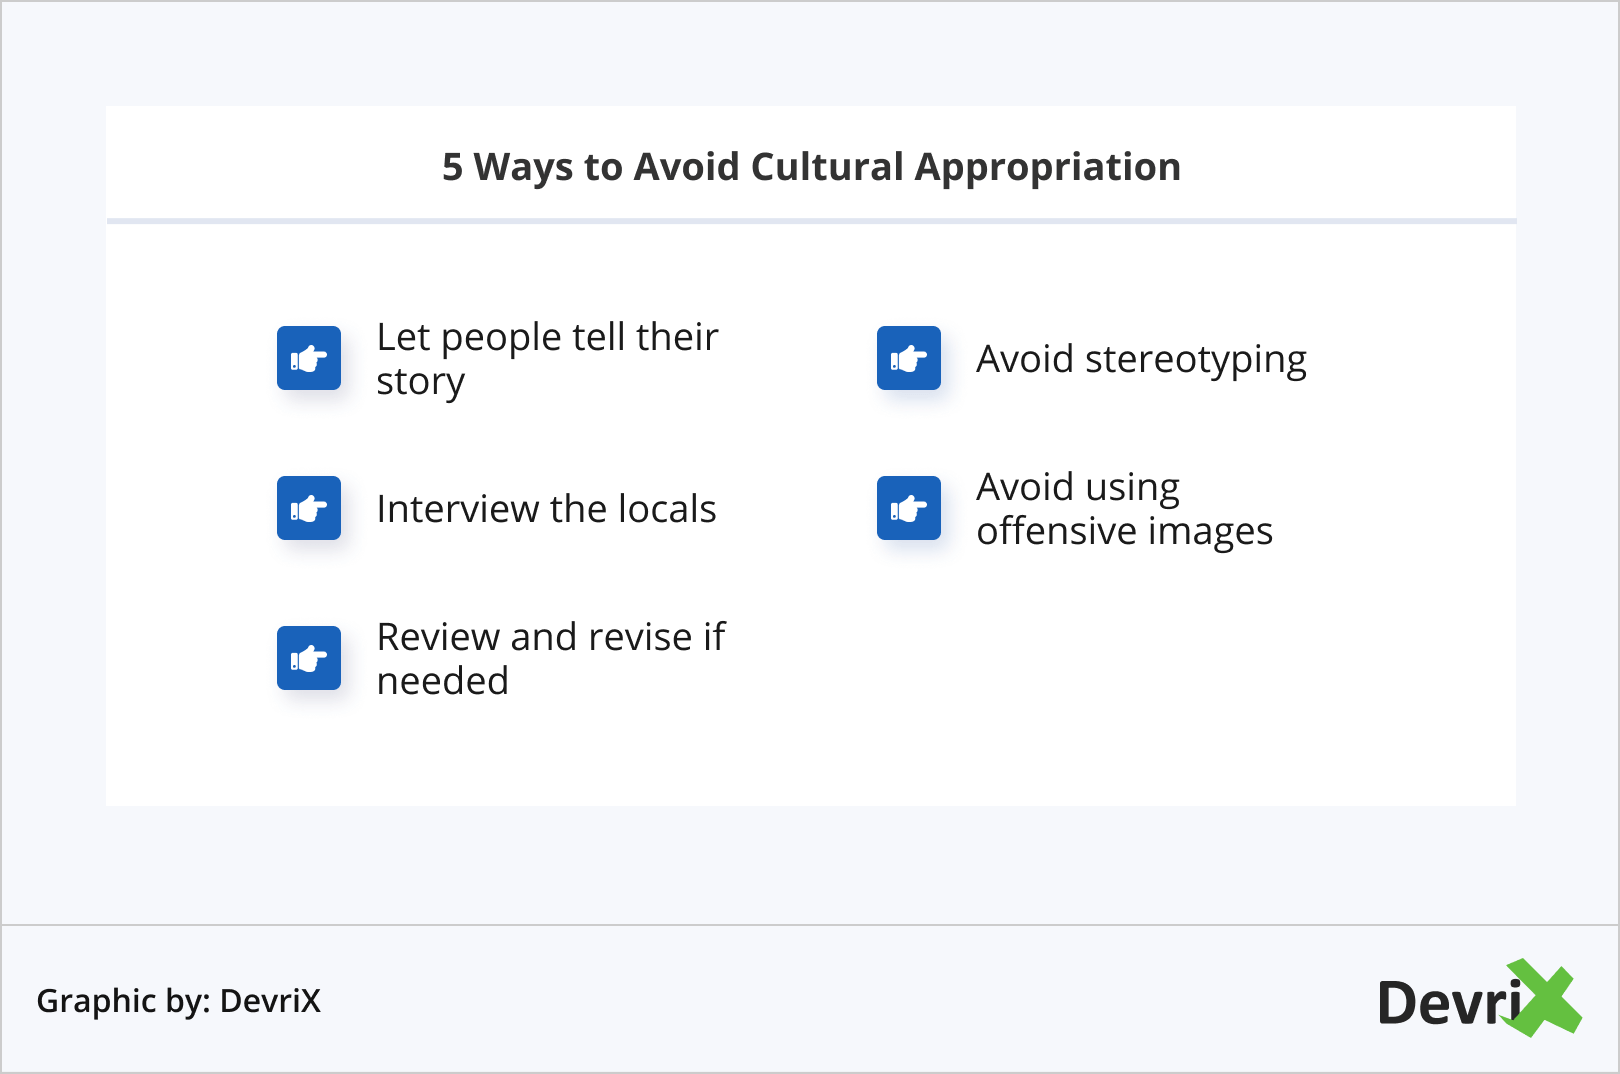 5 Ways to Avoid Cultural Appropriation